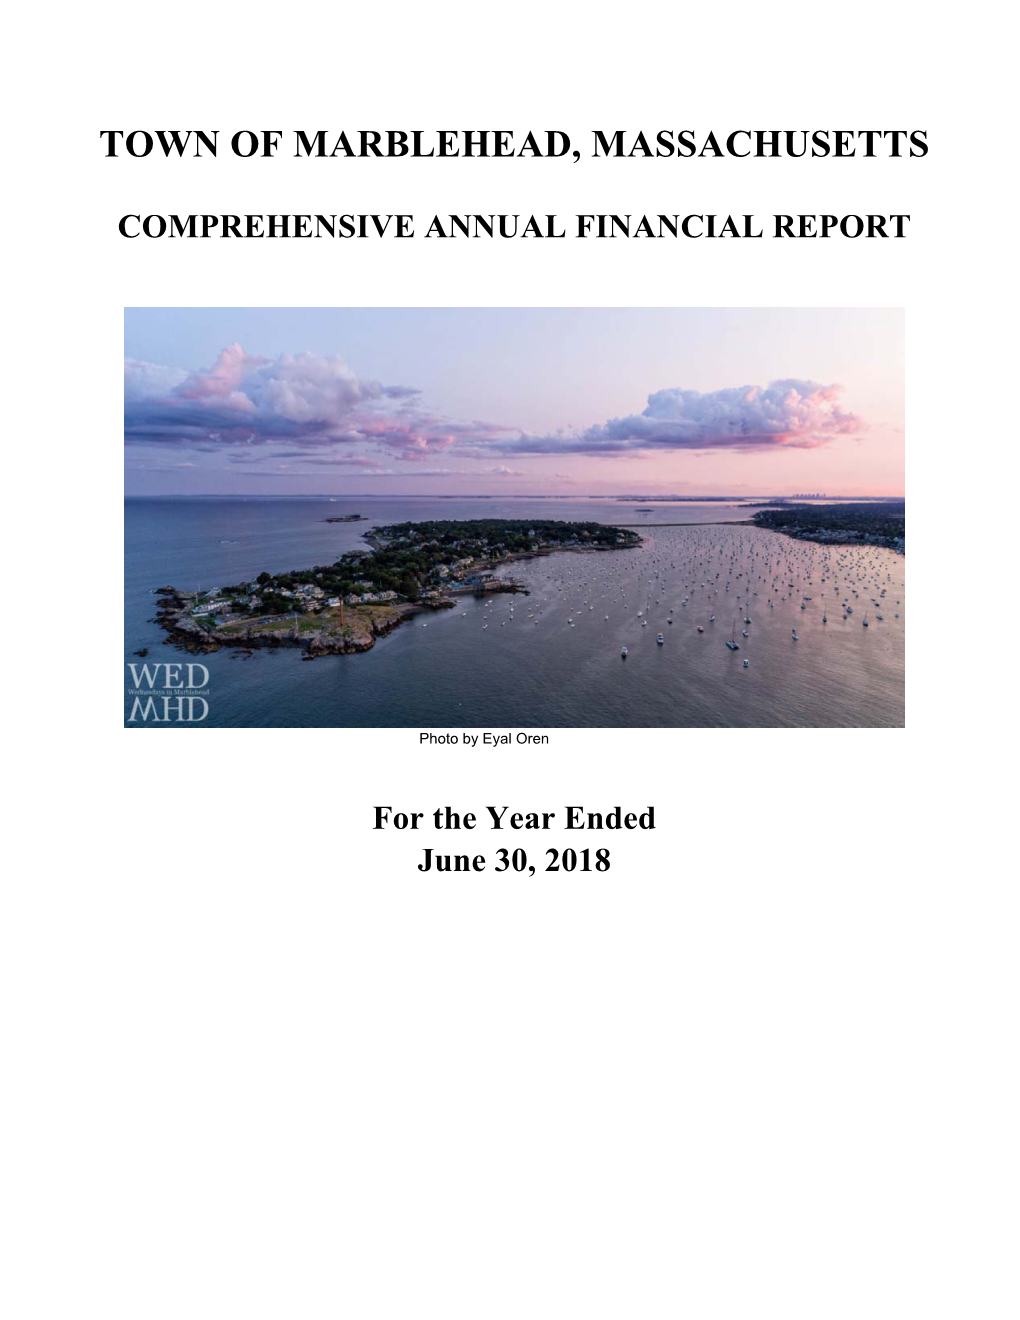 FY18 Town of Marblehead CAFR